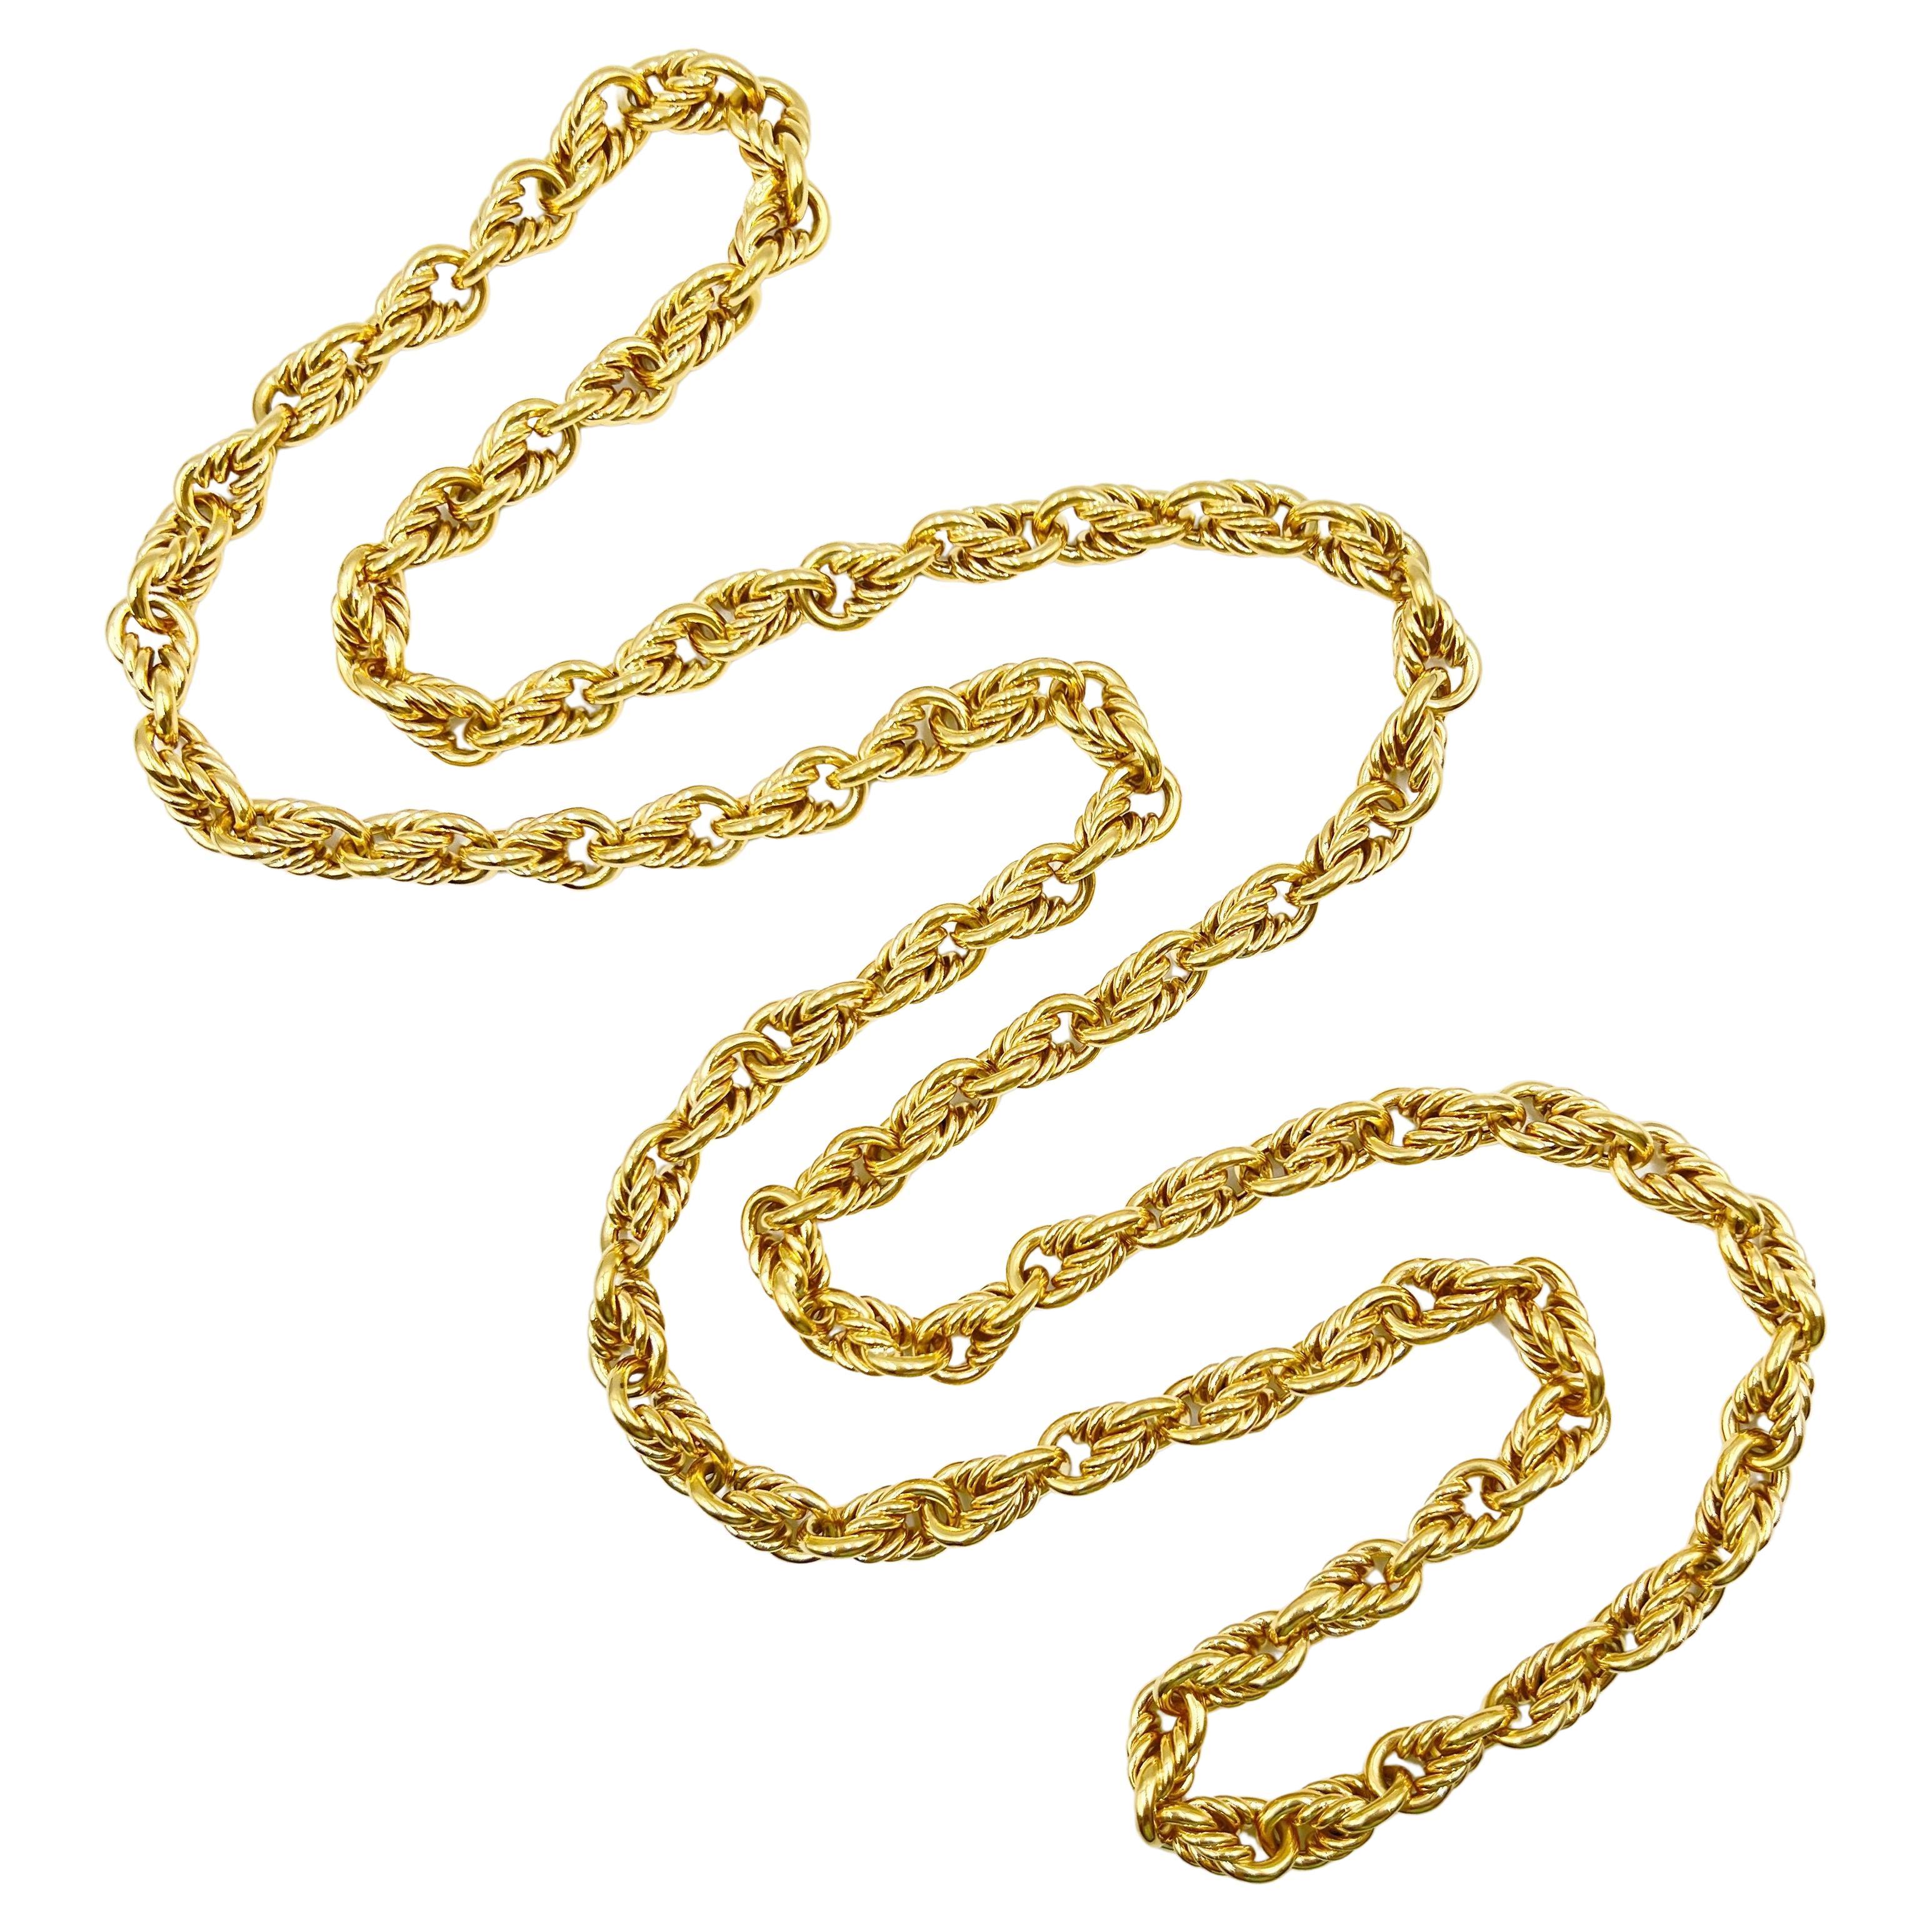 Tiffany & Co. 18k Gold Rope Long Chain Necklace